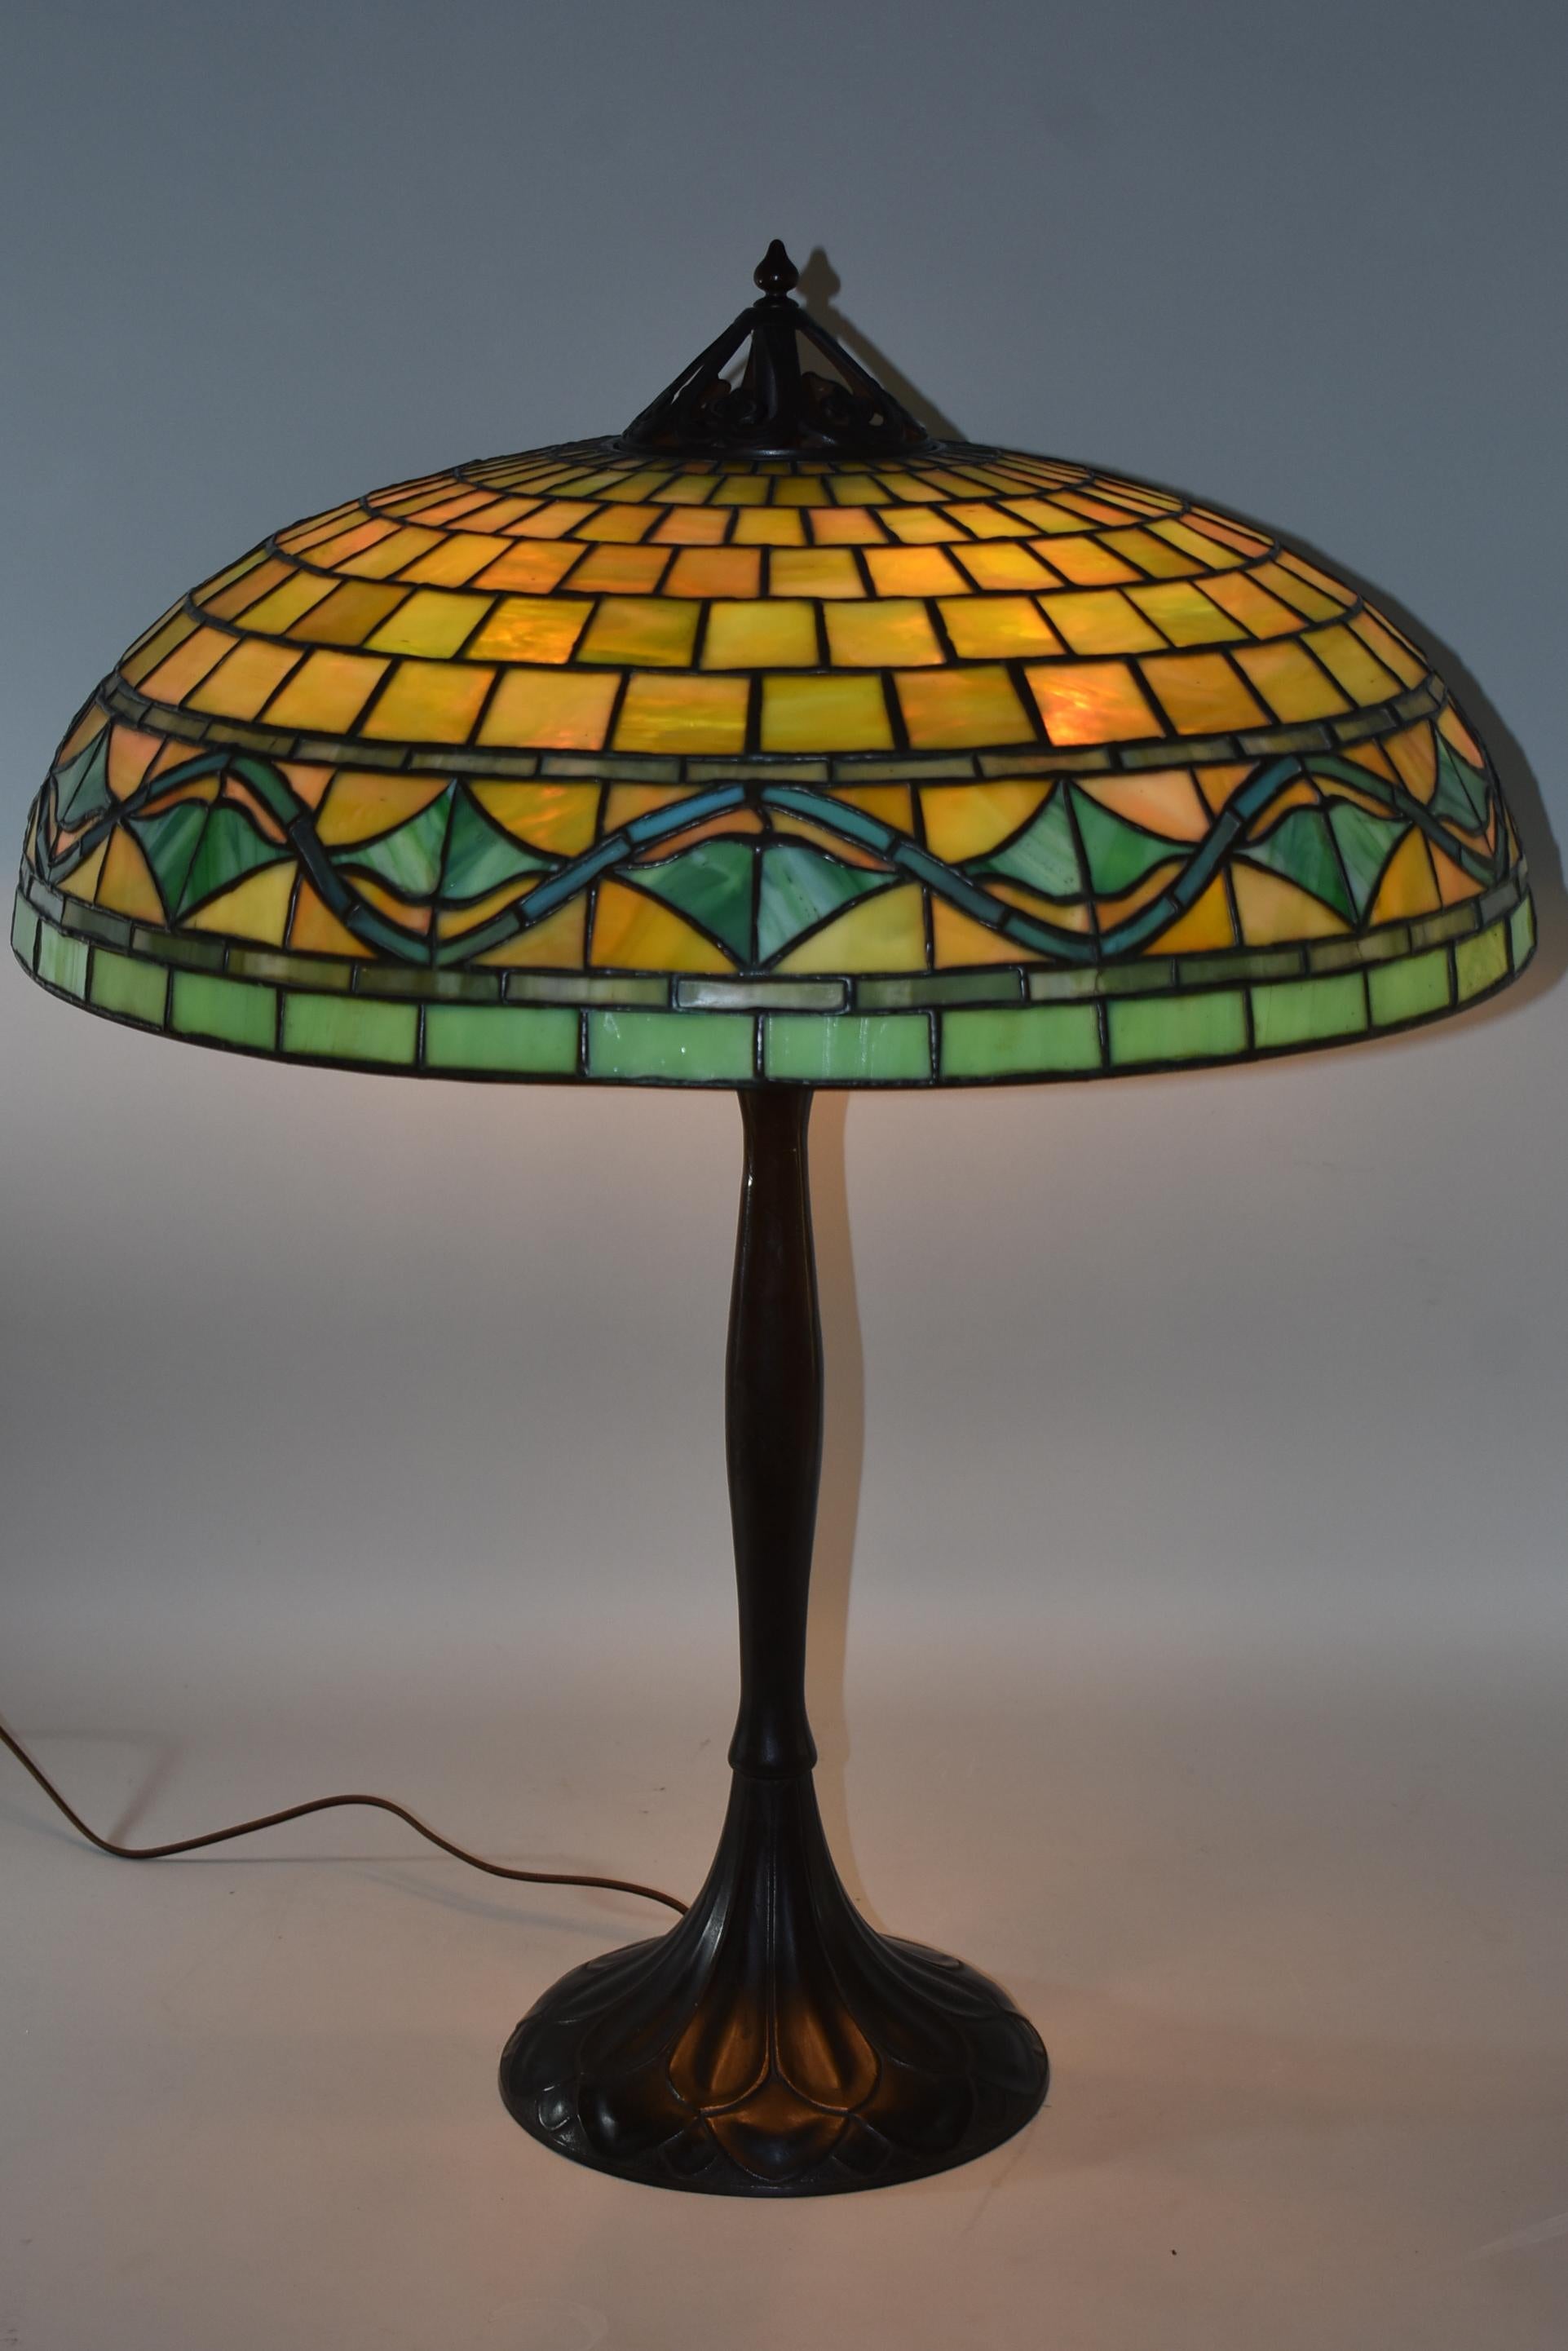 An incredible leaded glass lamp by Handel. This large-scale lamp features a signed, brass base with five Hubbell sockets and acorn pull chains. The beautiful shade features stylized leaves and vines with a heavy copper top ring. It is in great